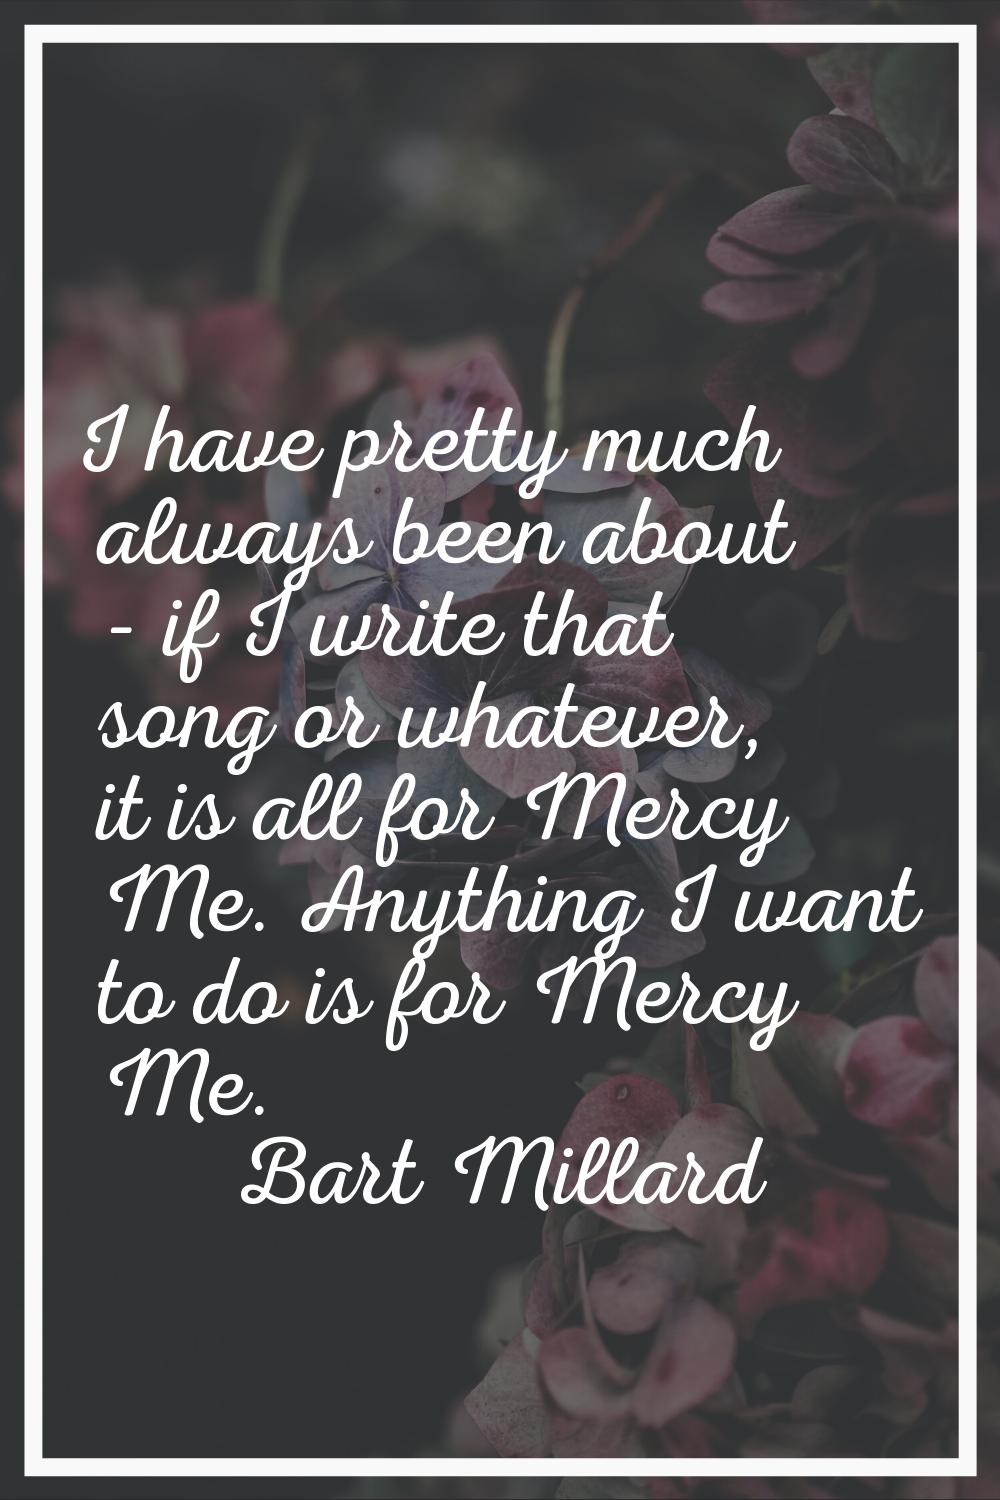 I have pretty much always been about - if I write that song or whatever, it is all for Mercy Me. An